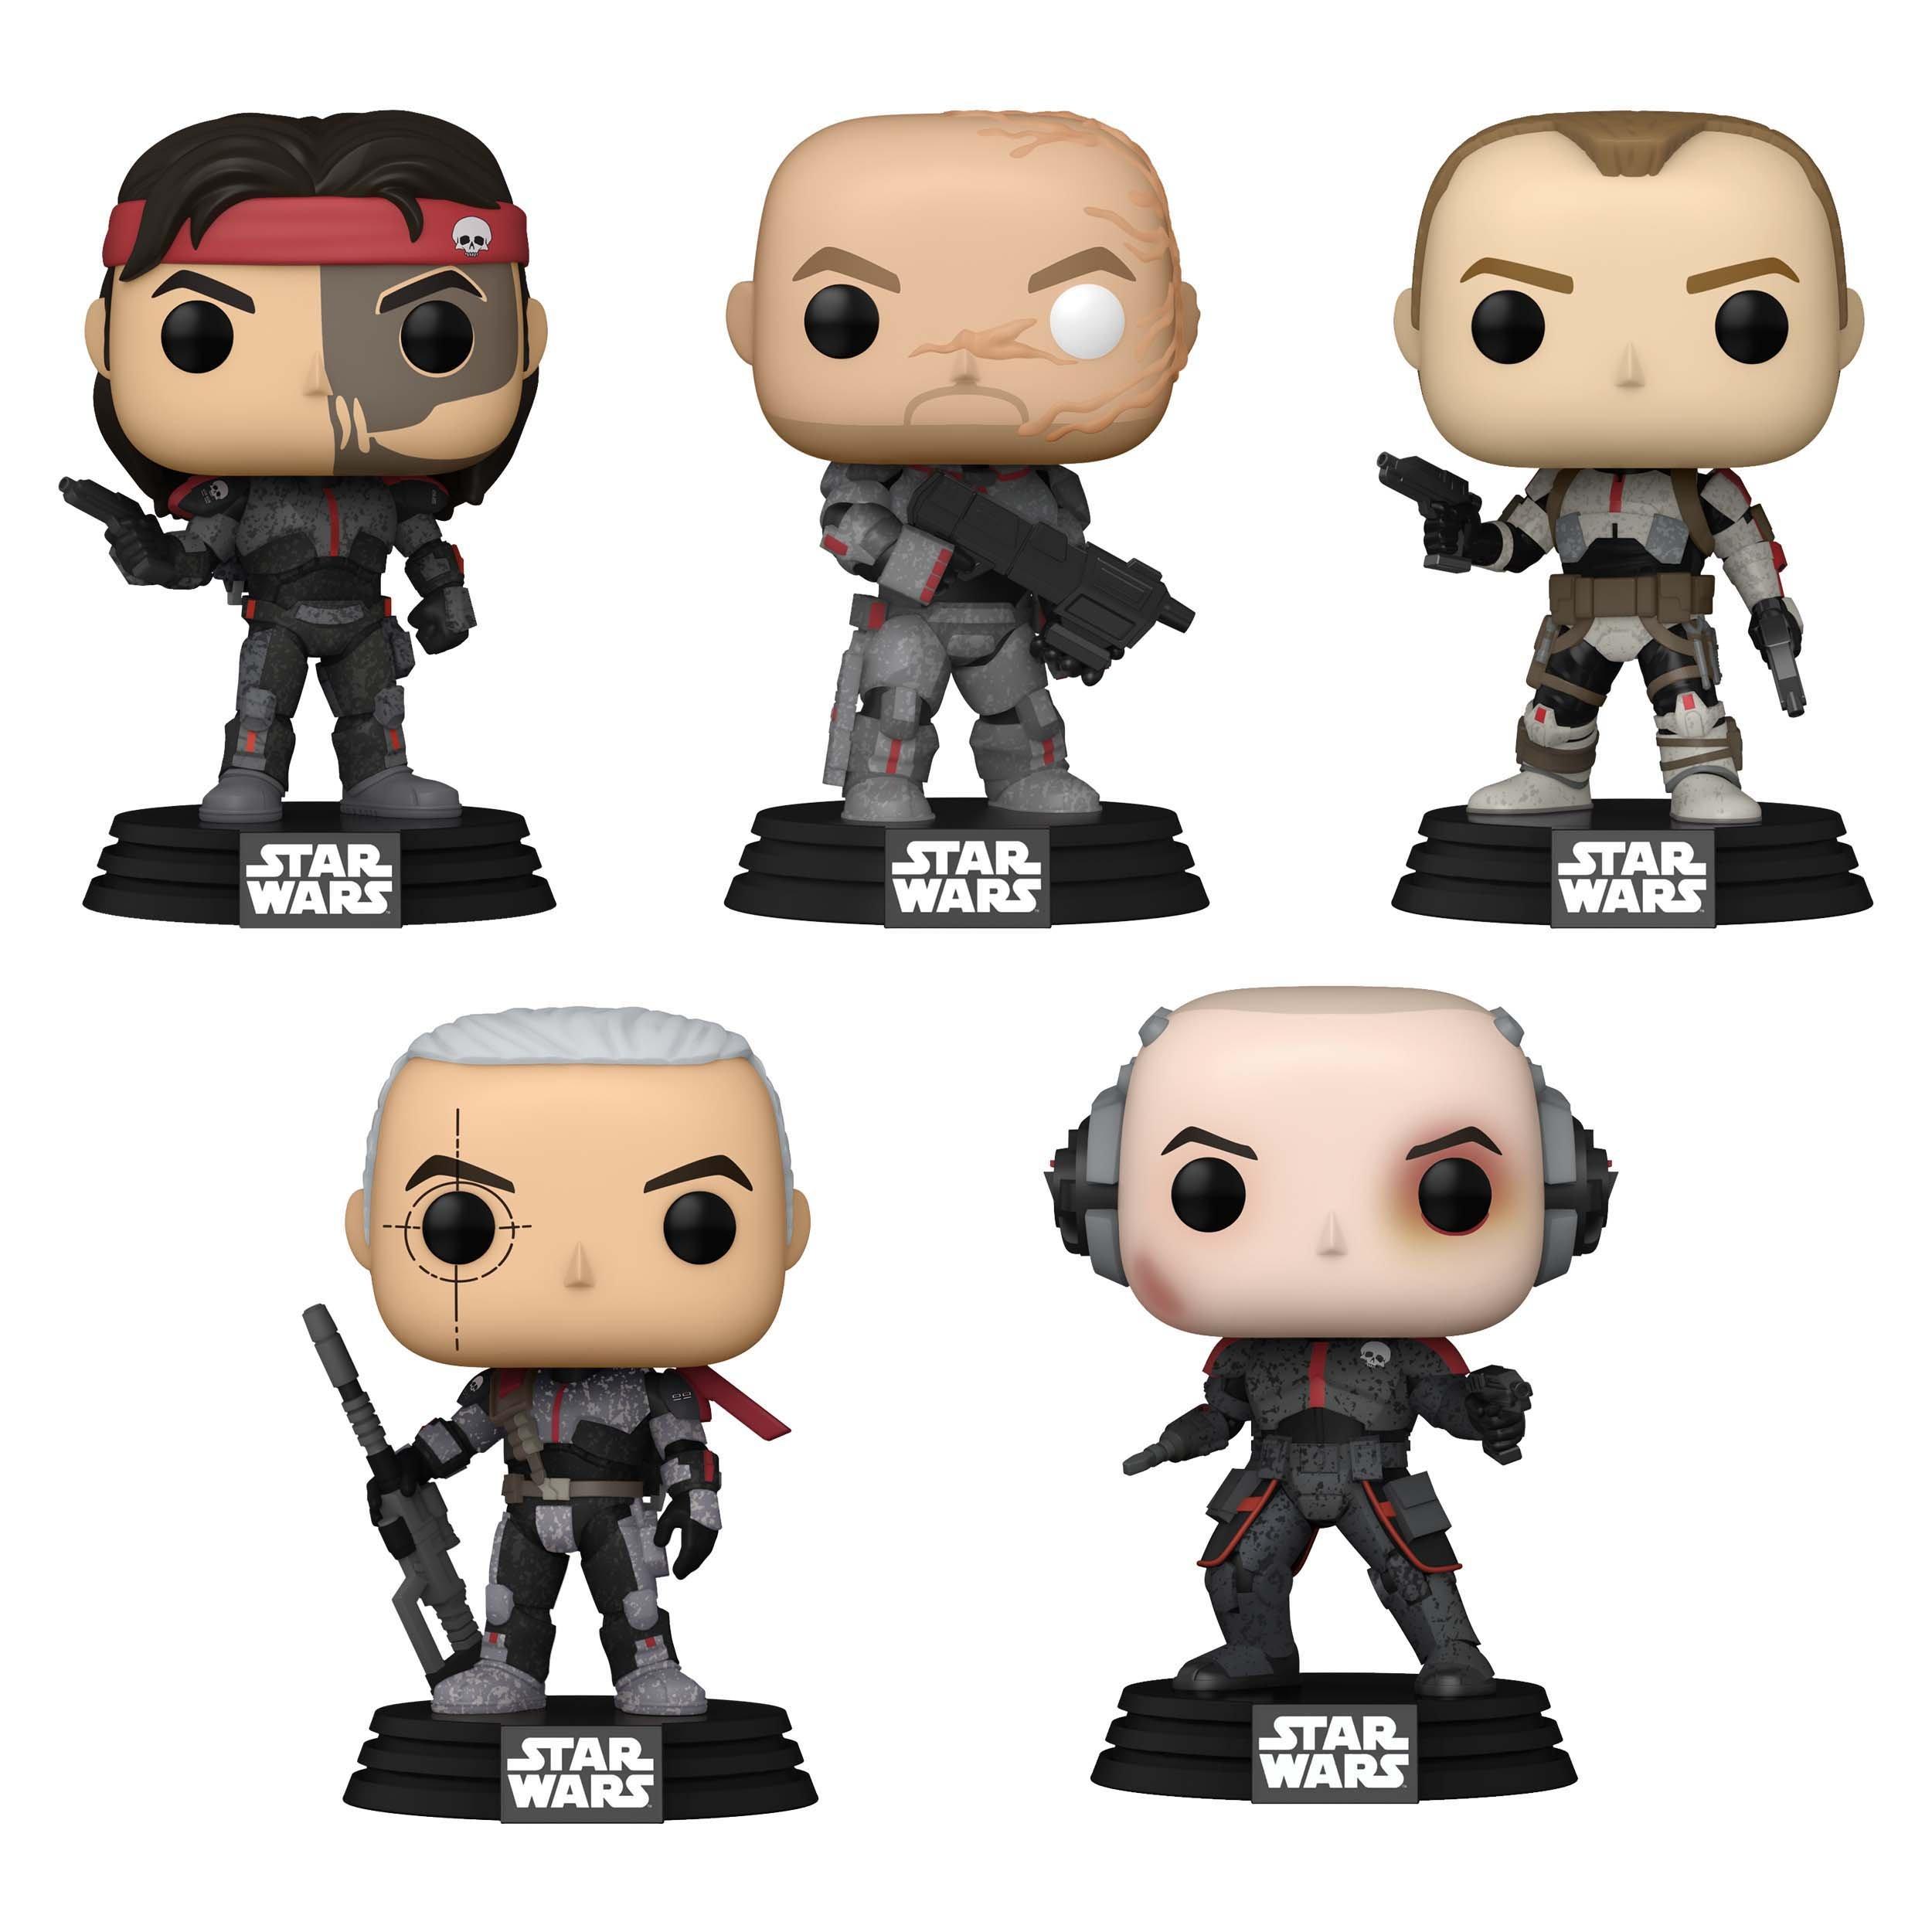 5-Pack Funko POP! Star Wars: The Bad Batch Vinyl Figures $34.98 + Free Store Pickup at Gamestop or Free Shipping on $59+